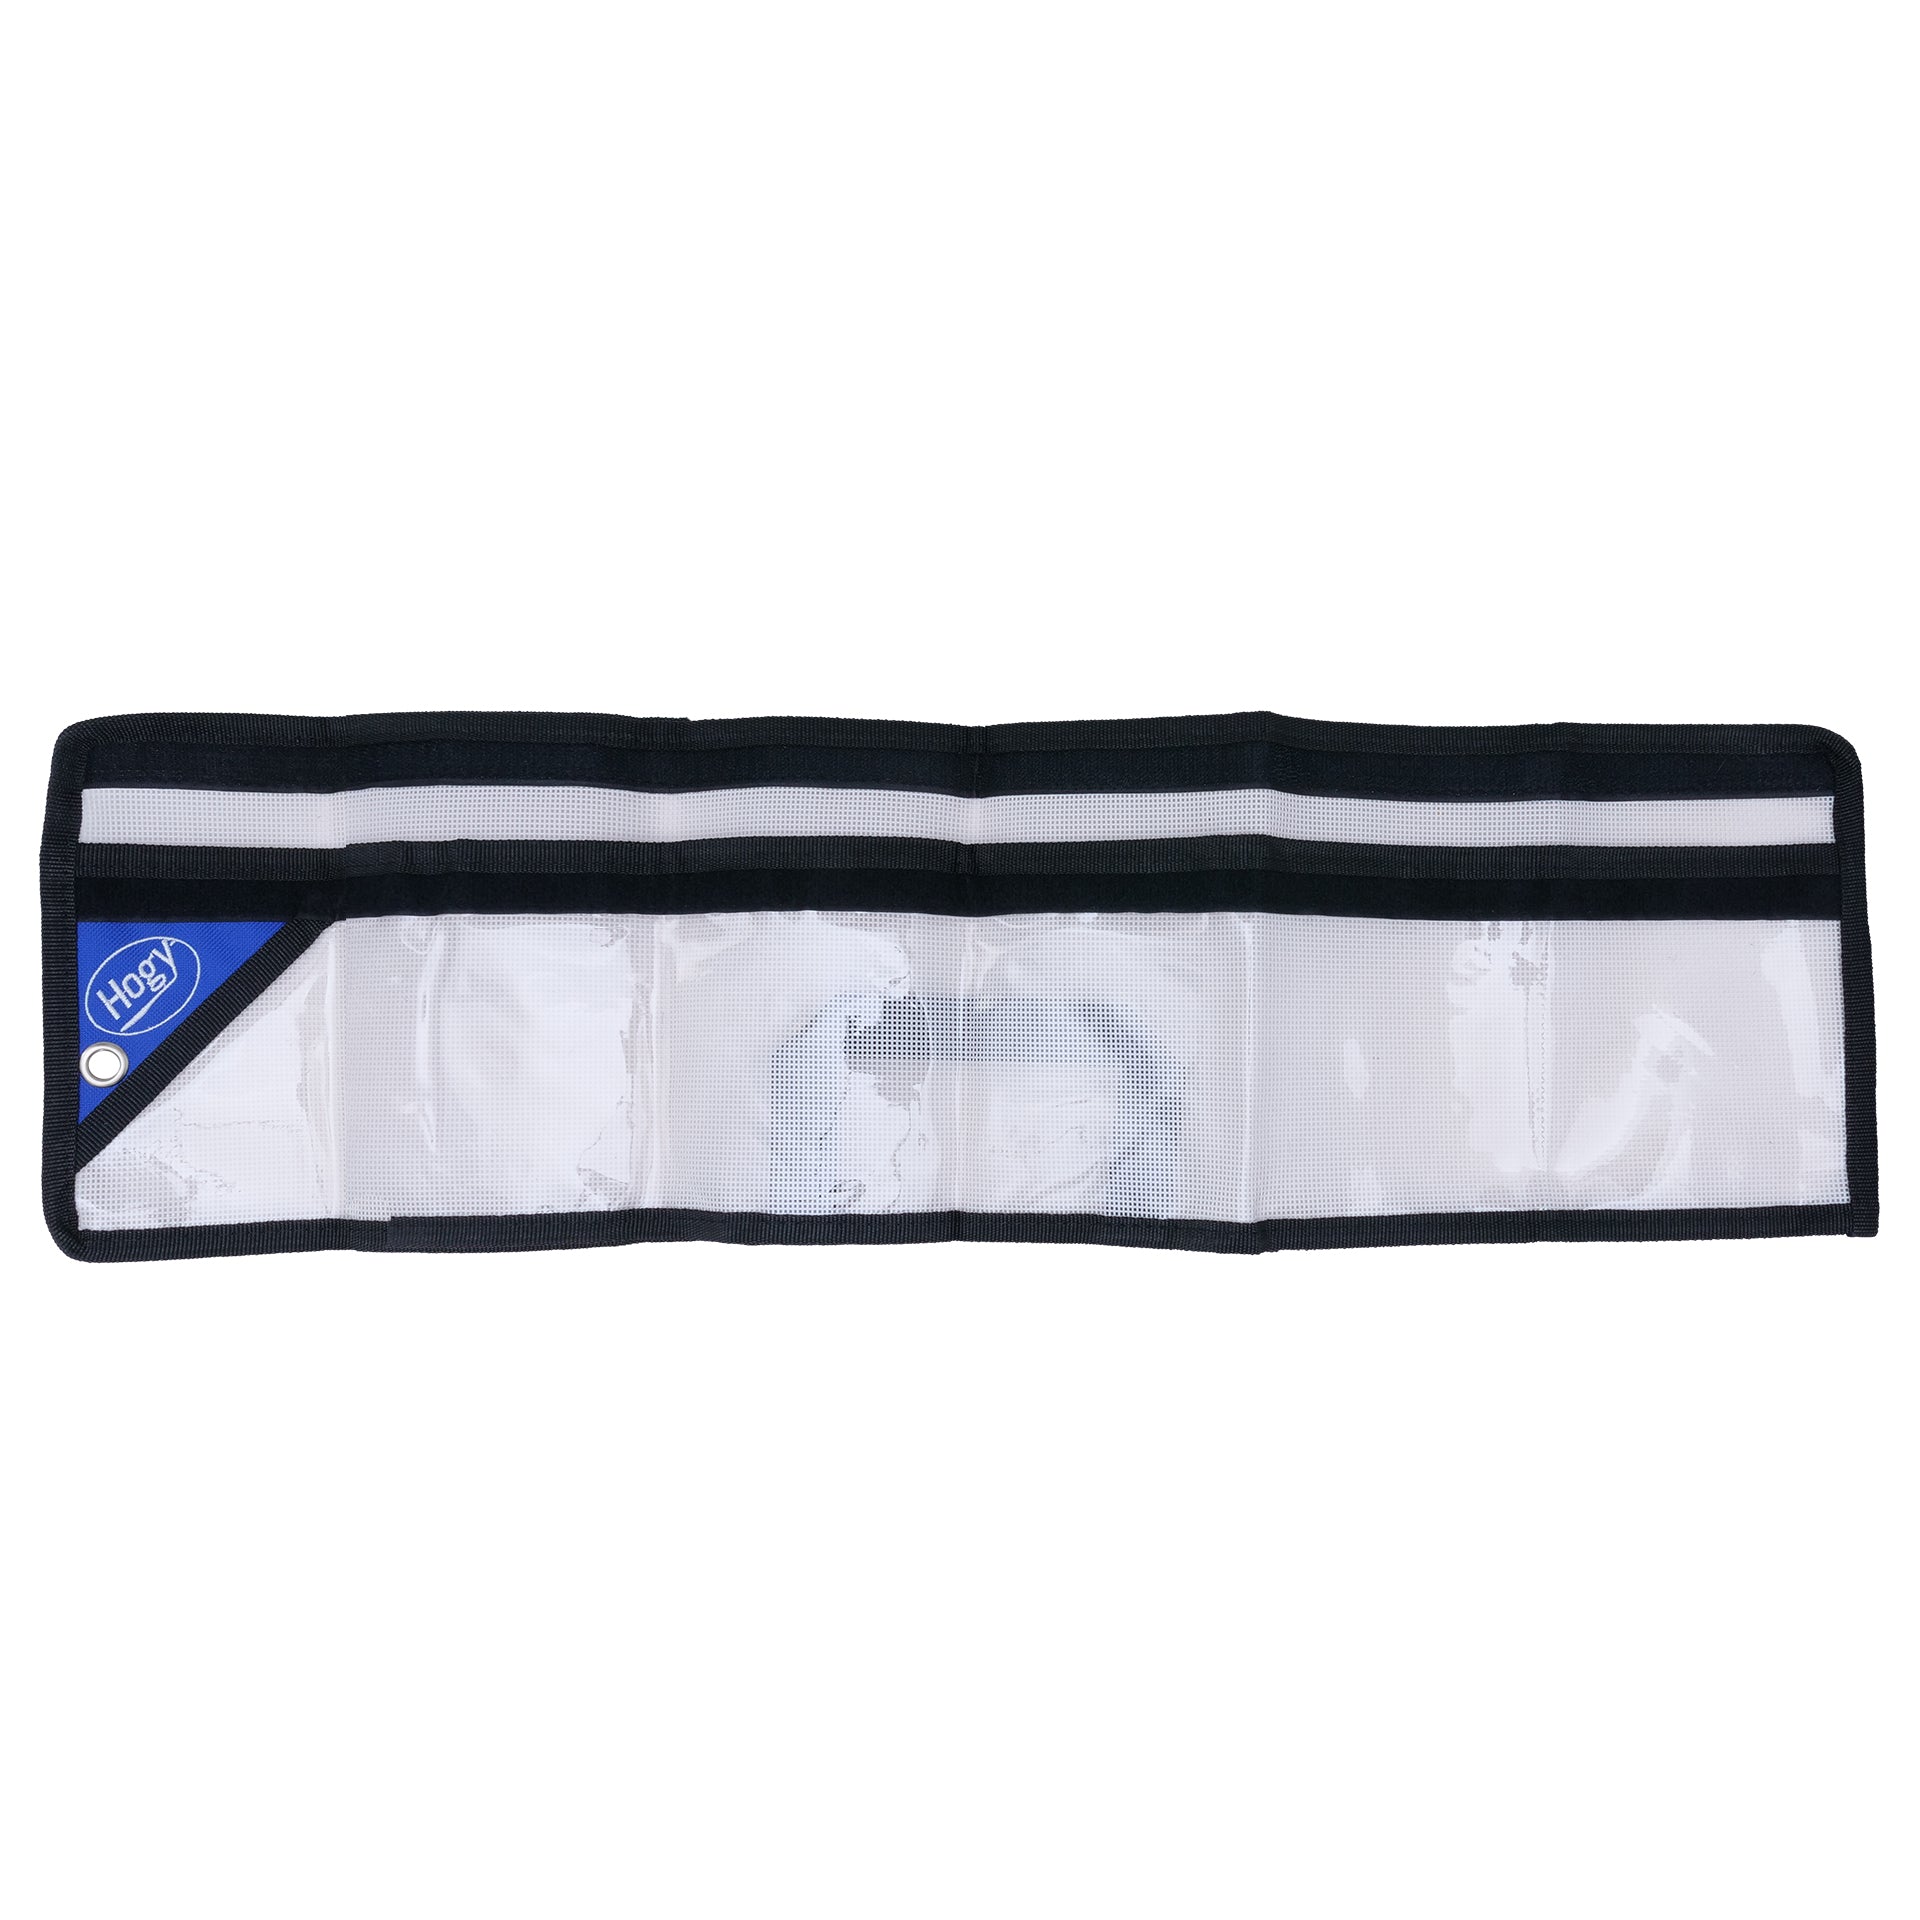 22" Mesh Tube Pouch (Holds Up To 10 Tubes)